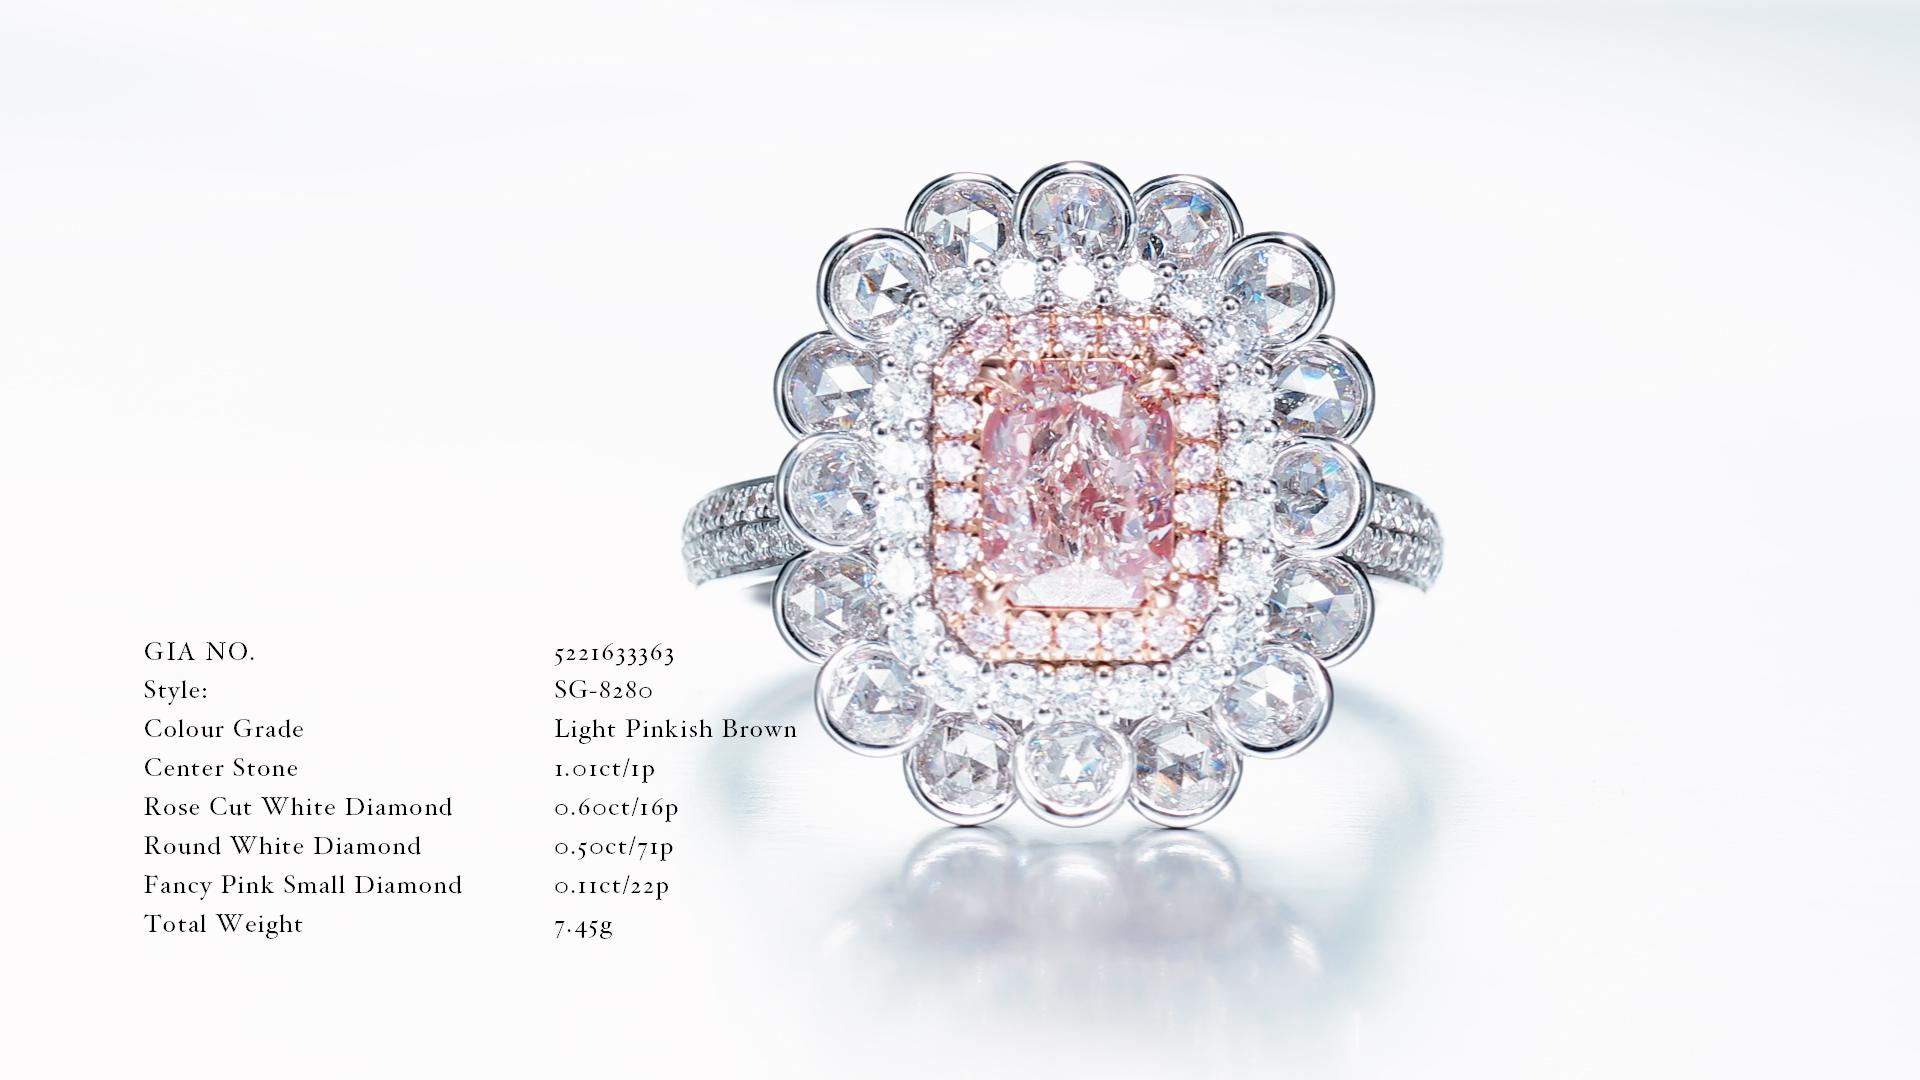  the characteristics for the described diamond jewelry with GIA Certification Number 5221633363:

Style: SG-8280

Colour Grade: Light Pinkish Brown

Center Stone:1.01 ct Radiant 

Carat Weight: 0.60 ct (rose cut)
Rose Cut White Diamond: 16pcs

Round